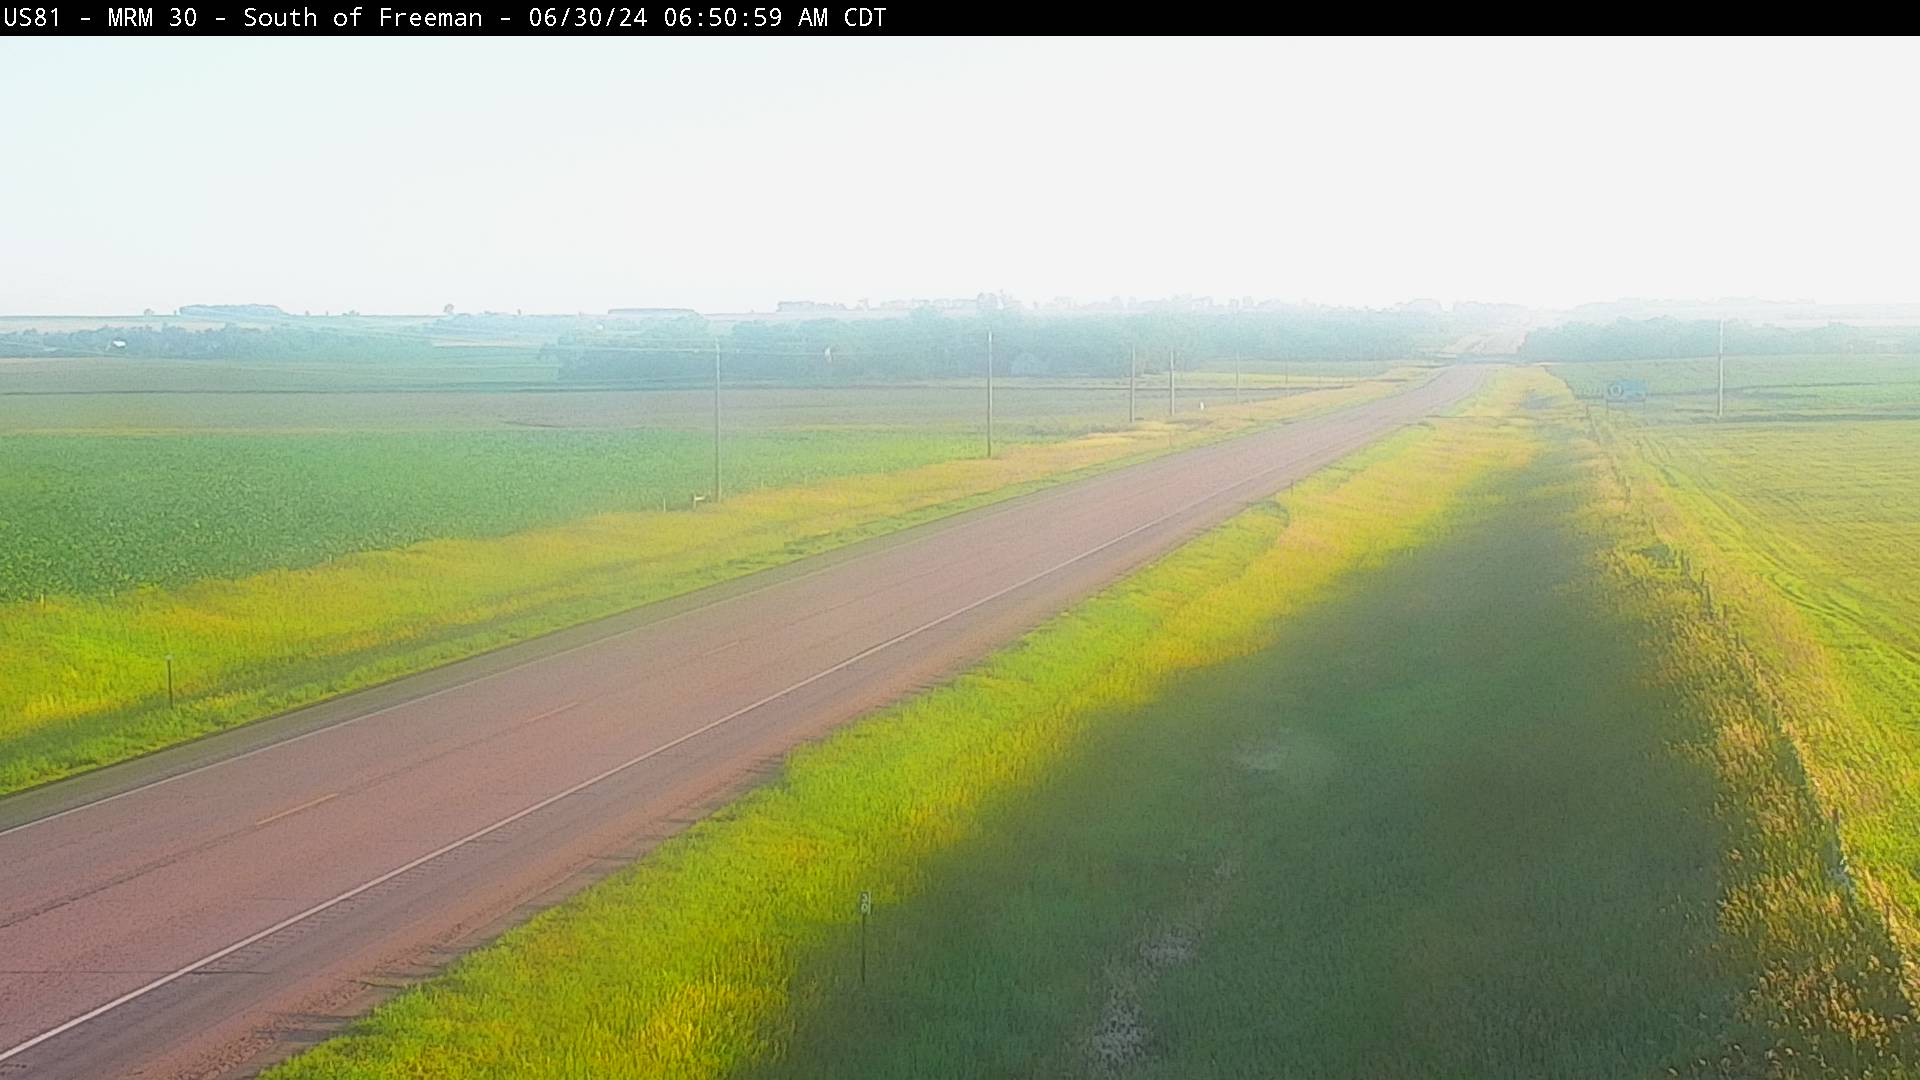 Traffic Cam 4 miles south of town along US-81 @ MP 30 - North Player